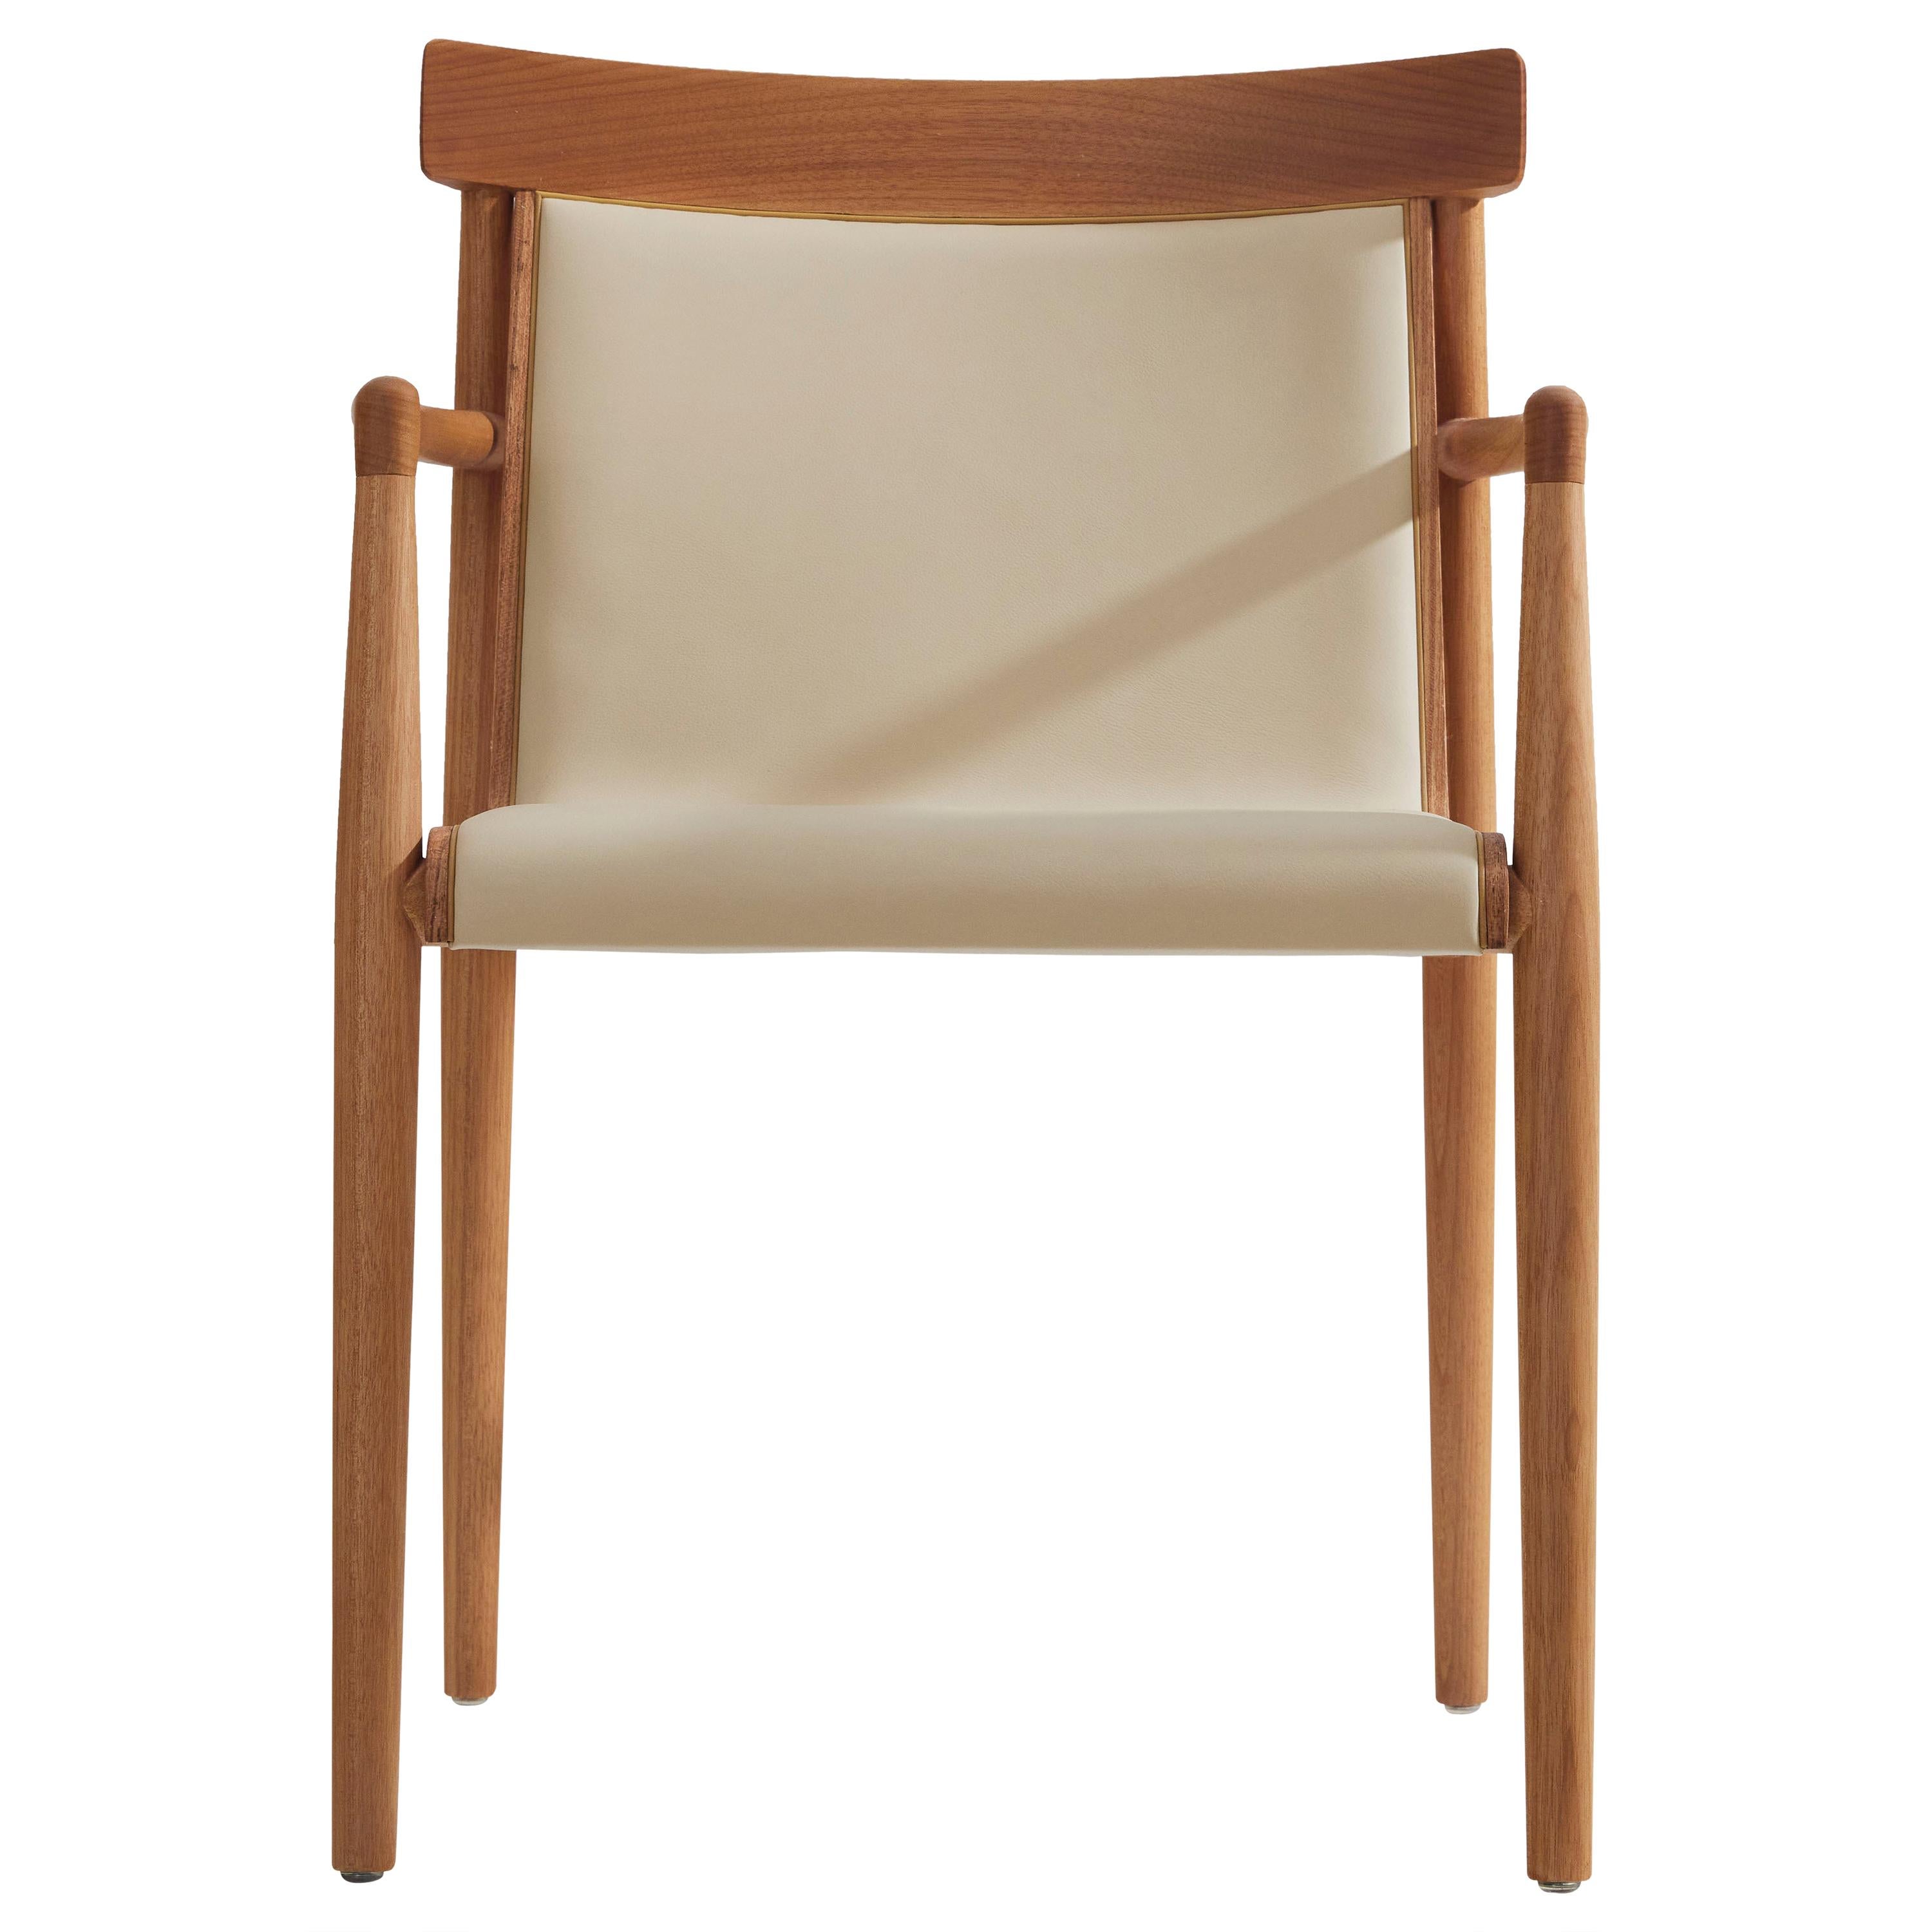 Contemporary Chair in Solid Wood, Upholstered in Leather or Textiles with Arms